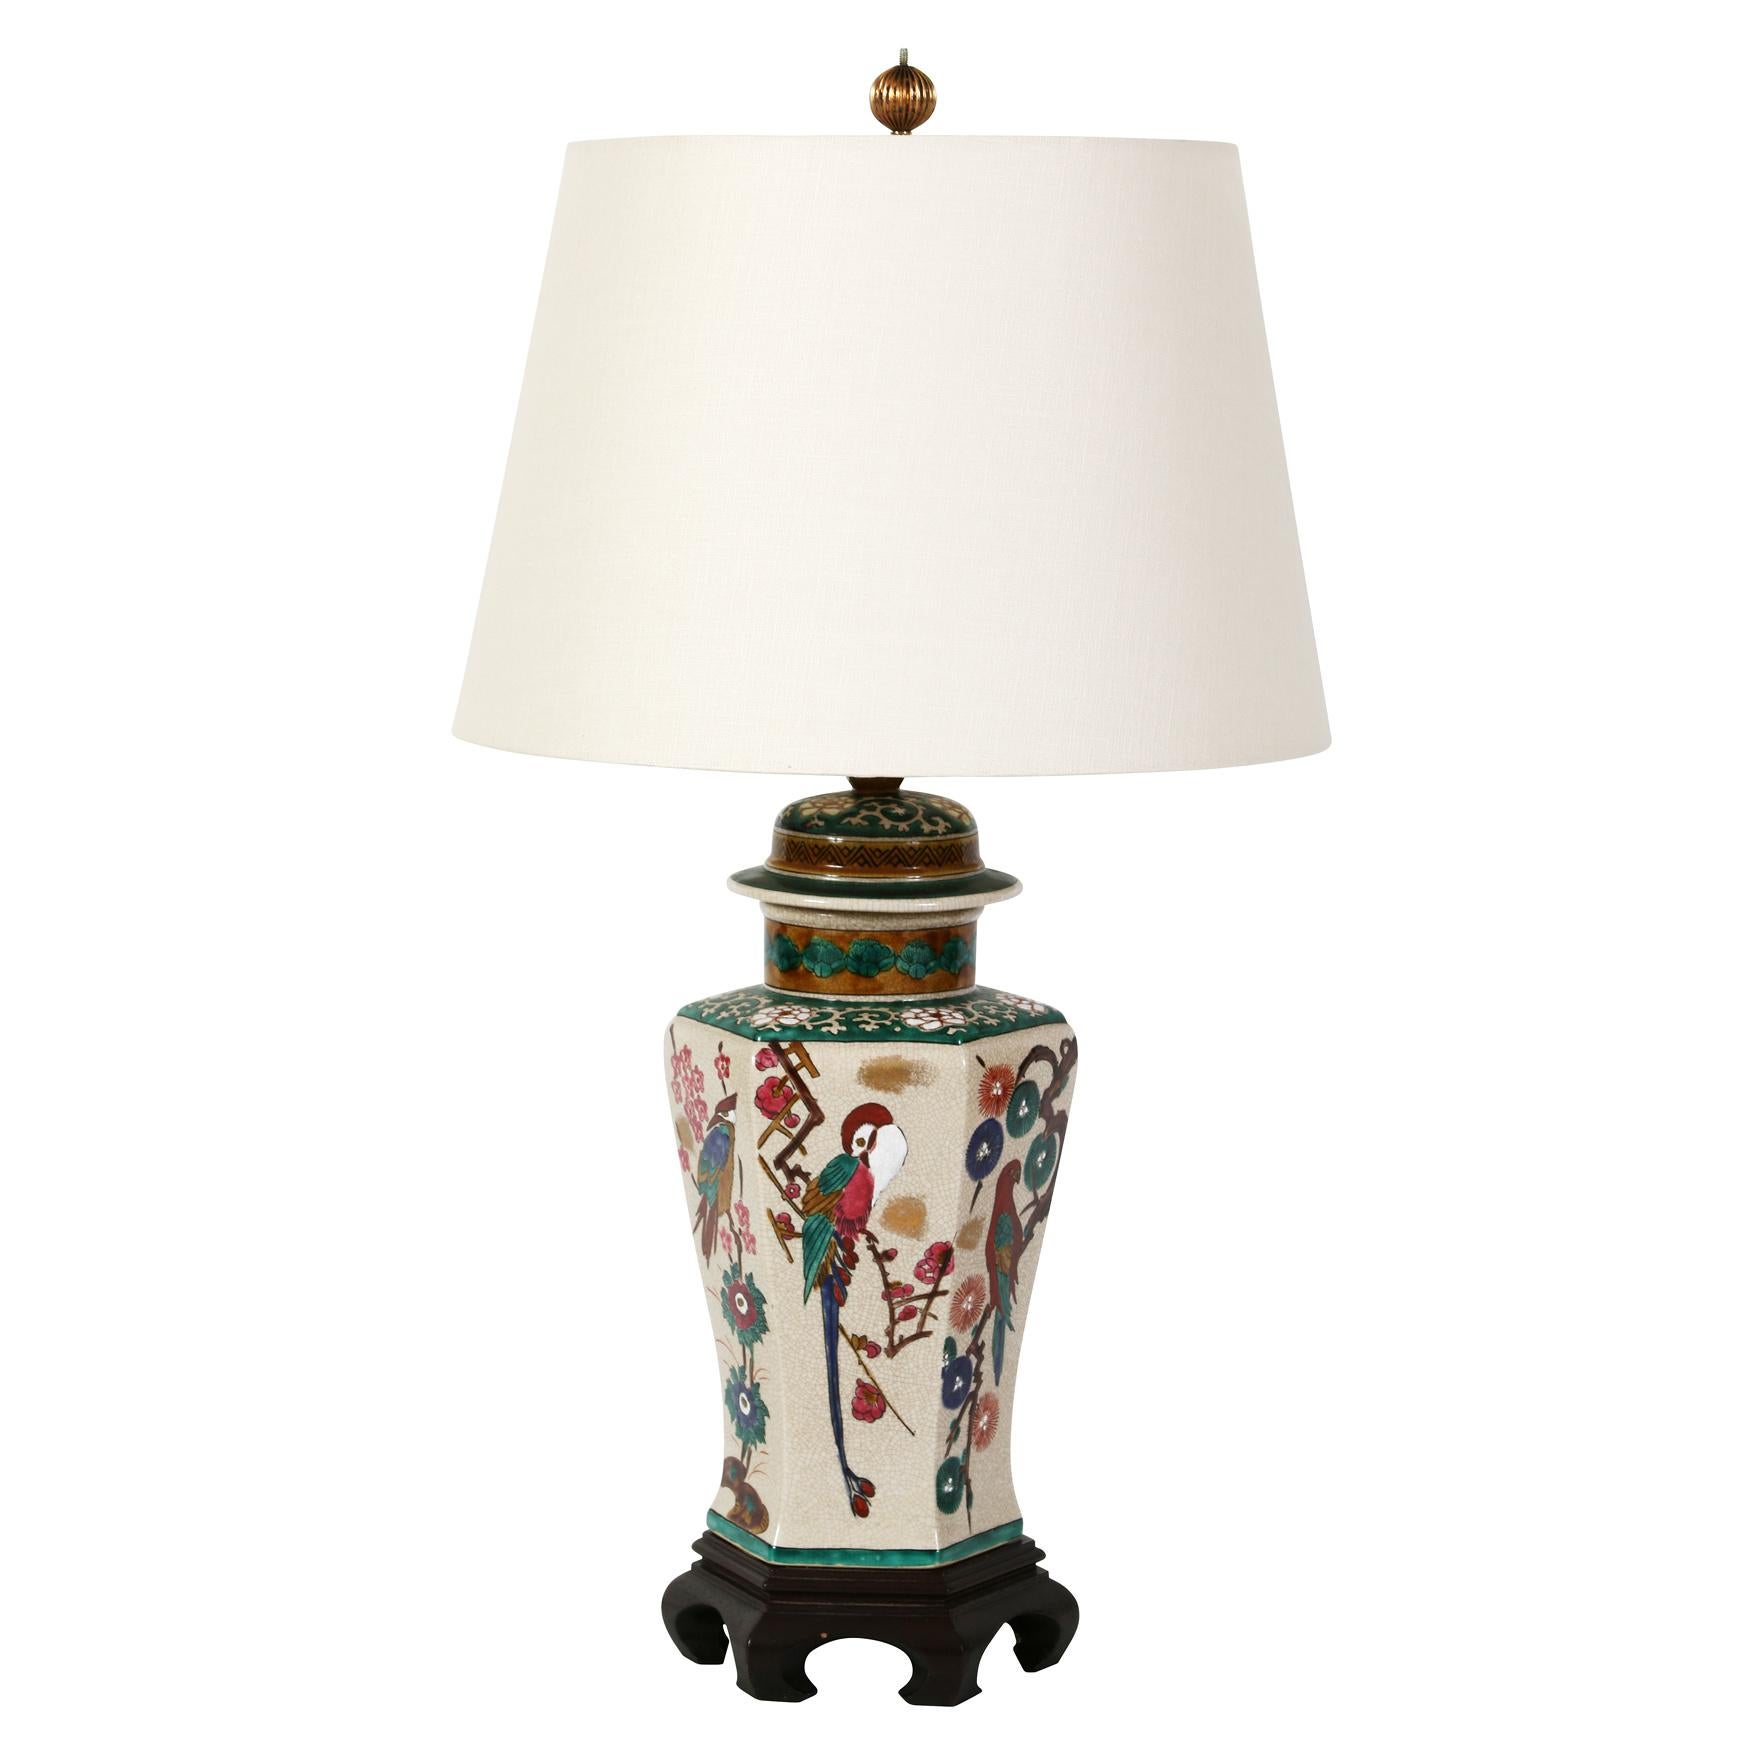 A pair of decorative Chinese export lamps decorated with flowers, branches and birds in shades of green, blue and red.